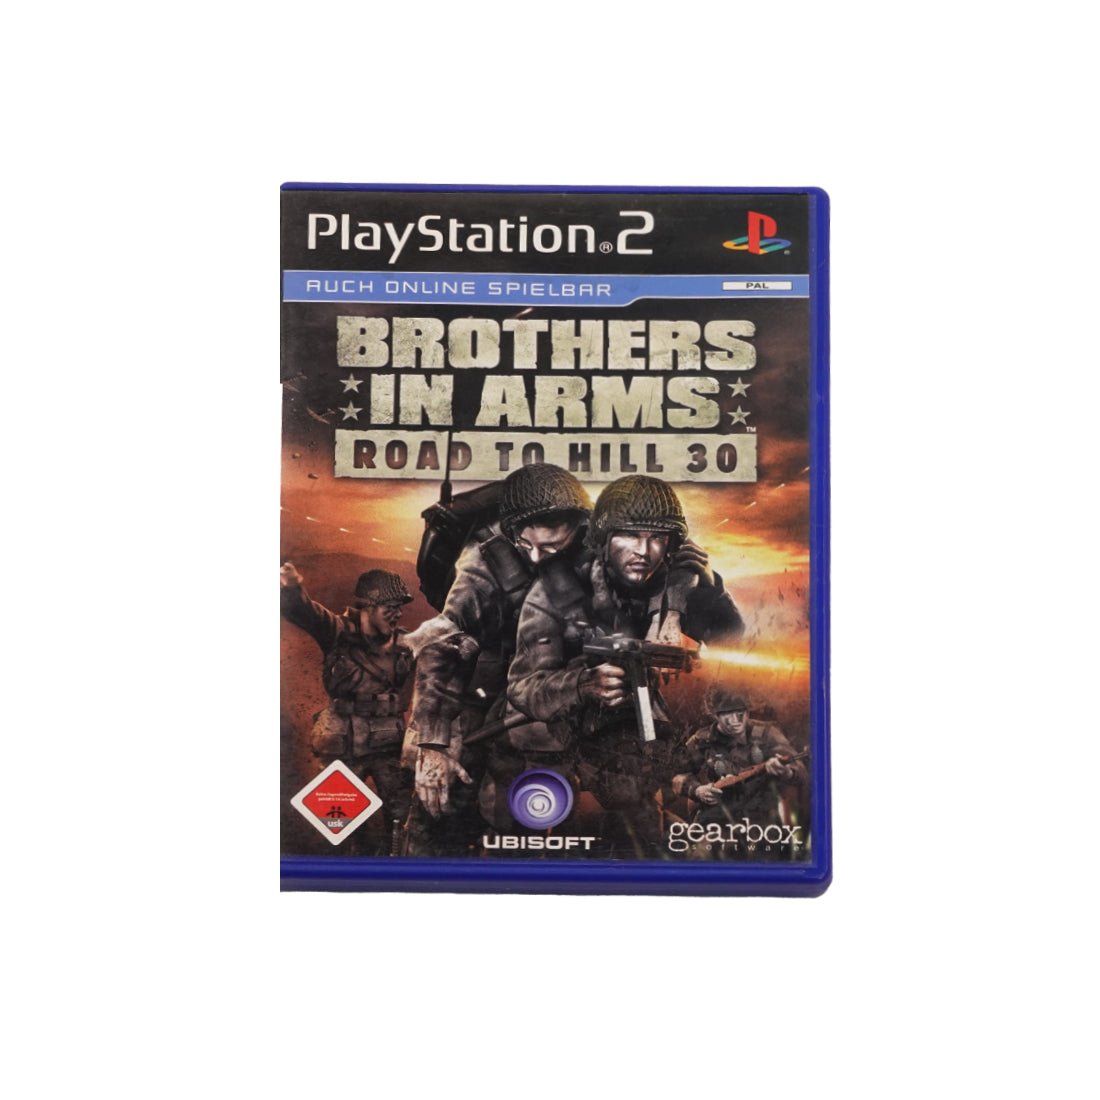 (Pre-Owned) Brothers in Arms: Road to Hill 30 - PlayStation 2 - ريترو - Store 974 | ستور ٩٧٤